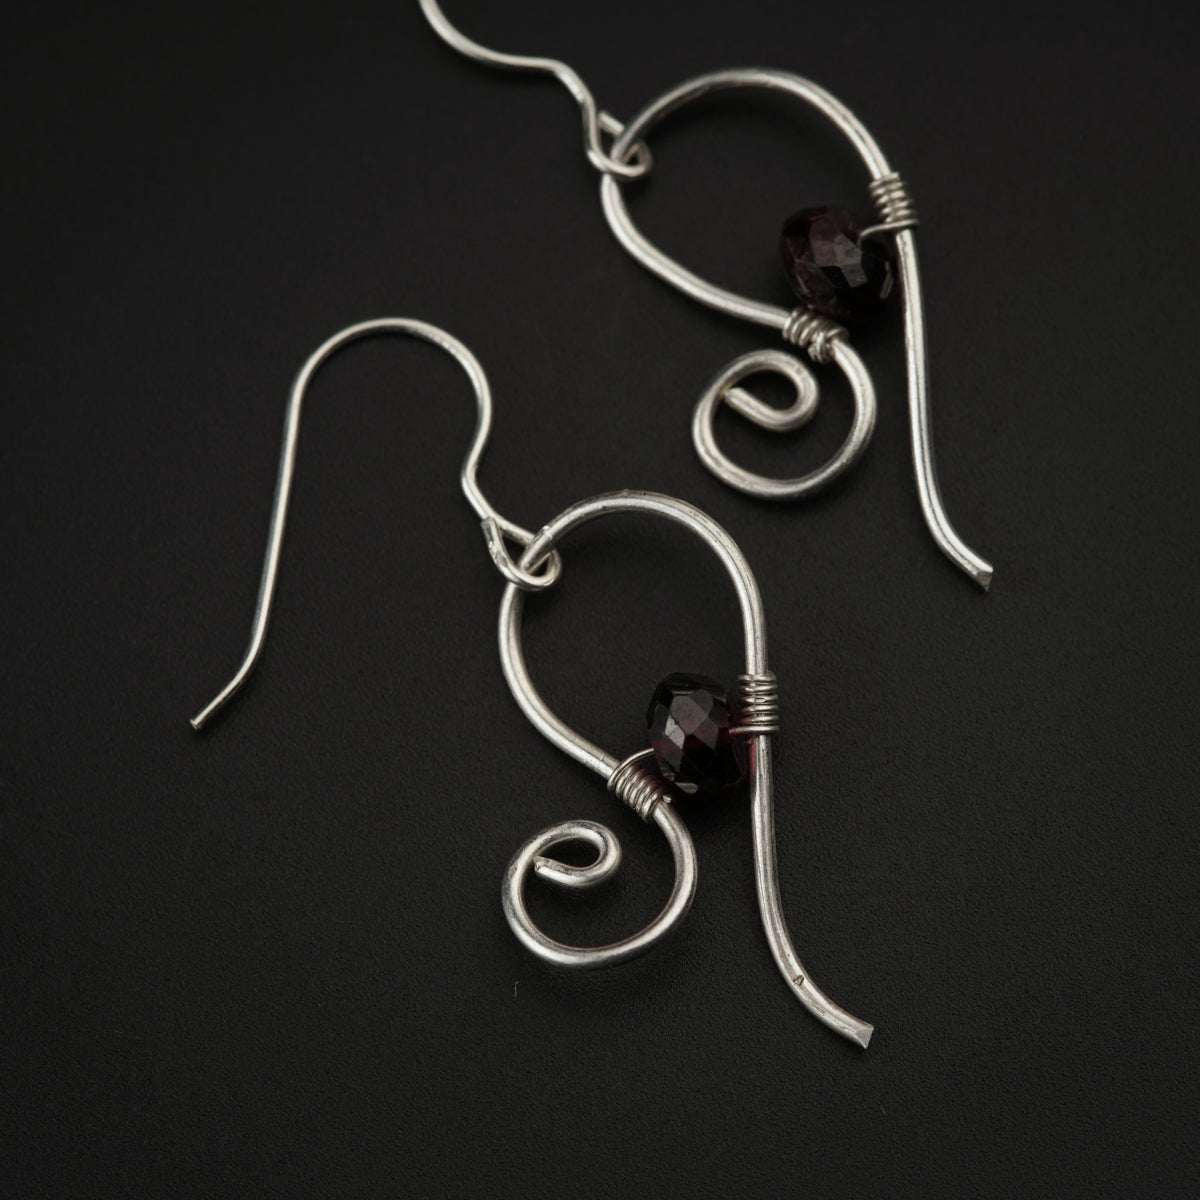 Silver Sparkle Earring with Garnet